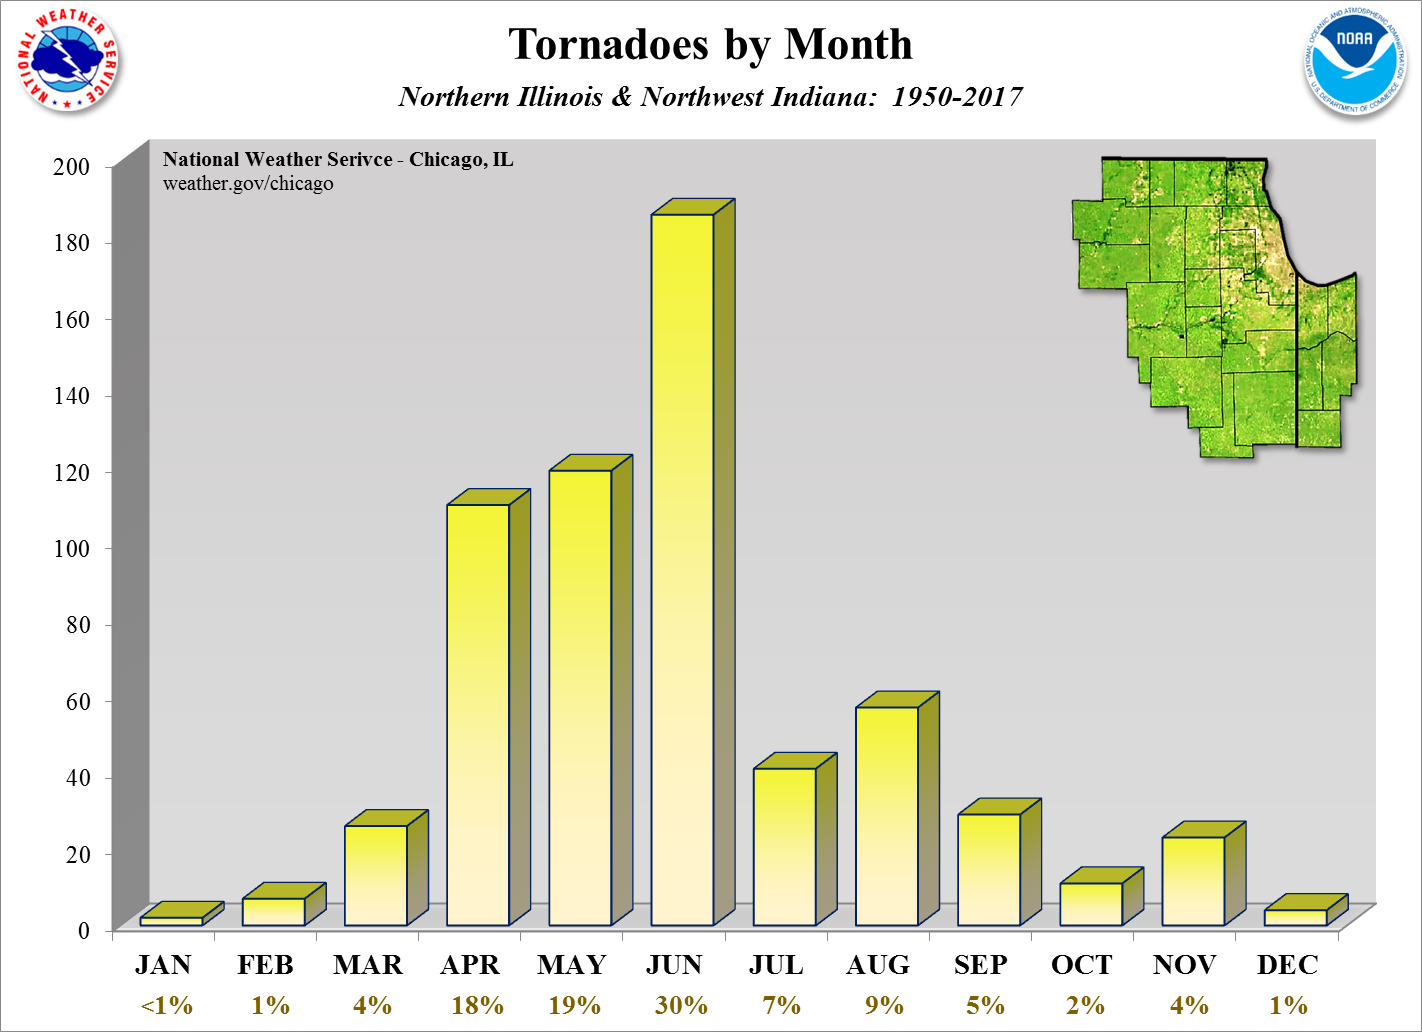 Graphic showing the number of tornadoes by month in northeast Illinois and northwest Indiana